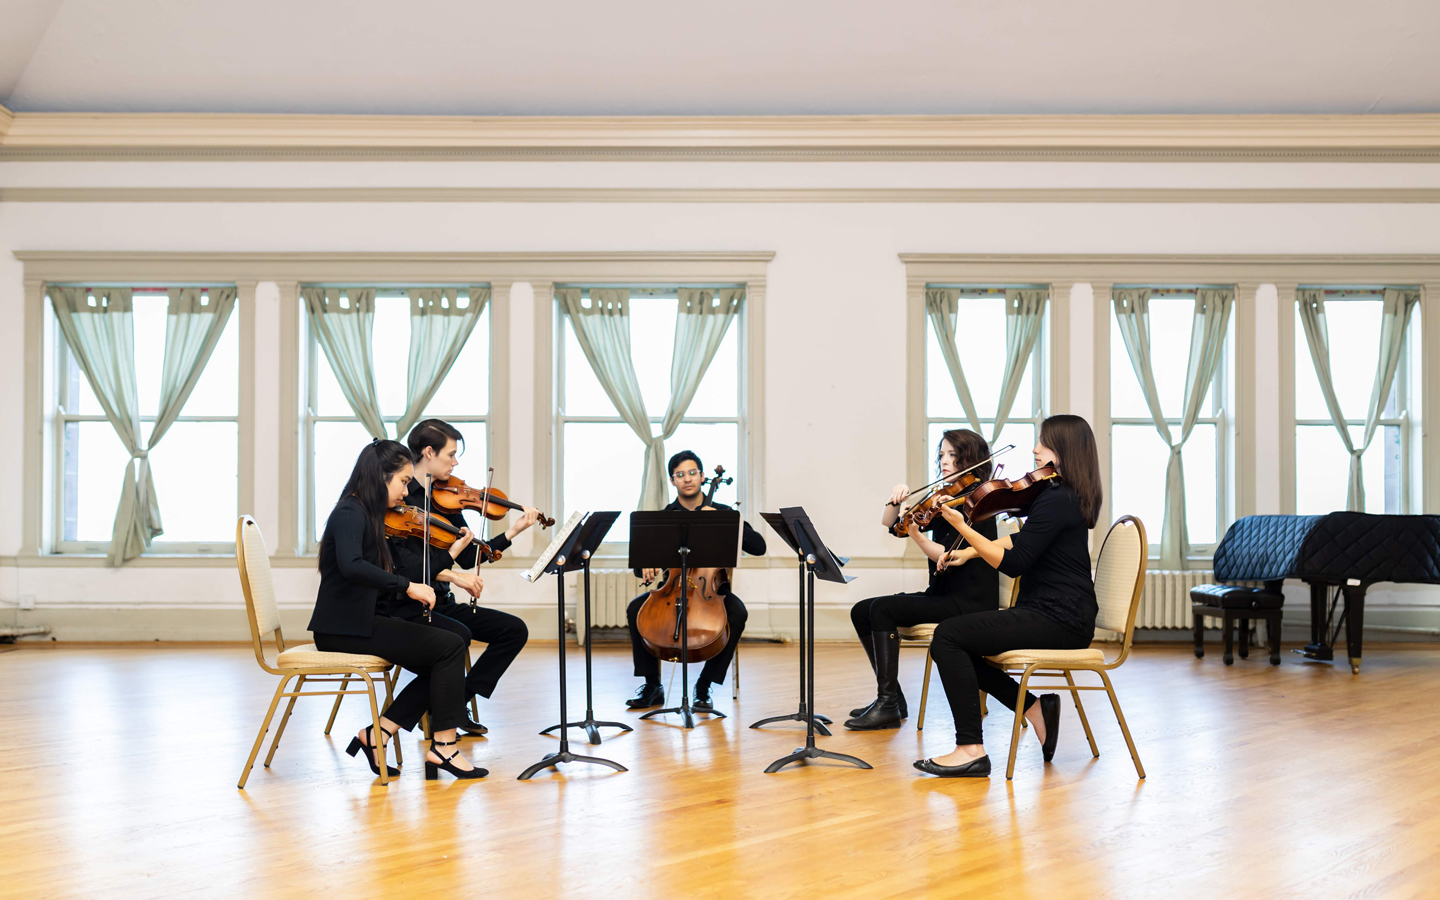 Four student playing violin and one student playing the chello sitting in a bright room with large windows.